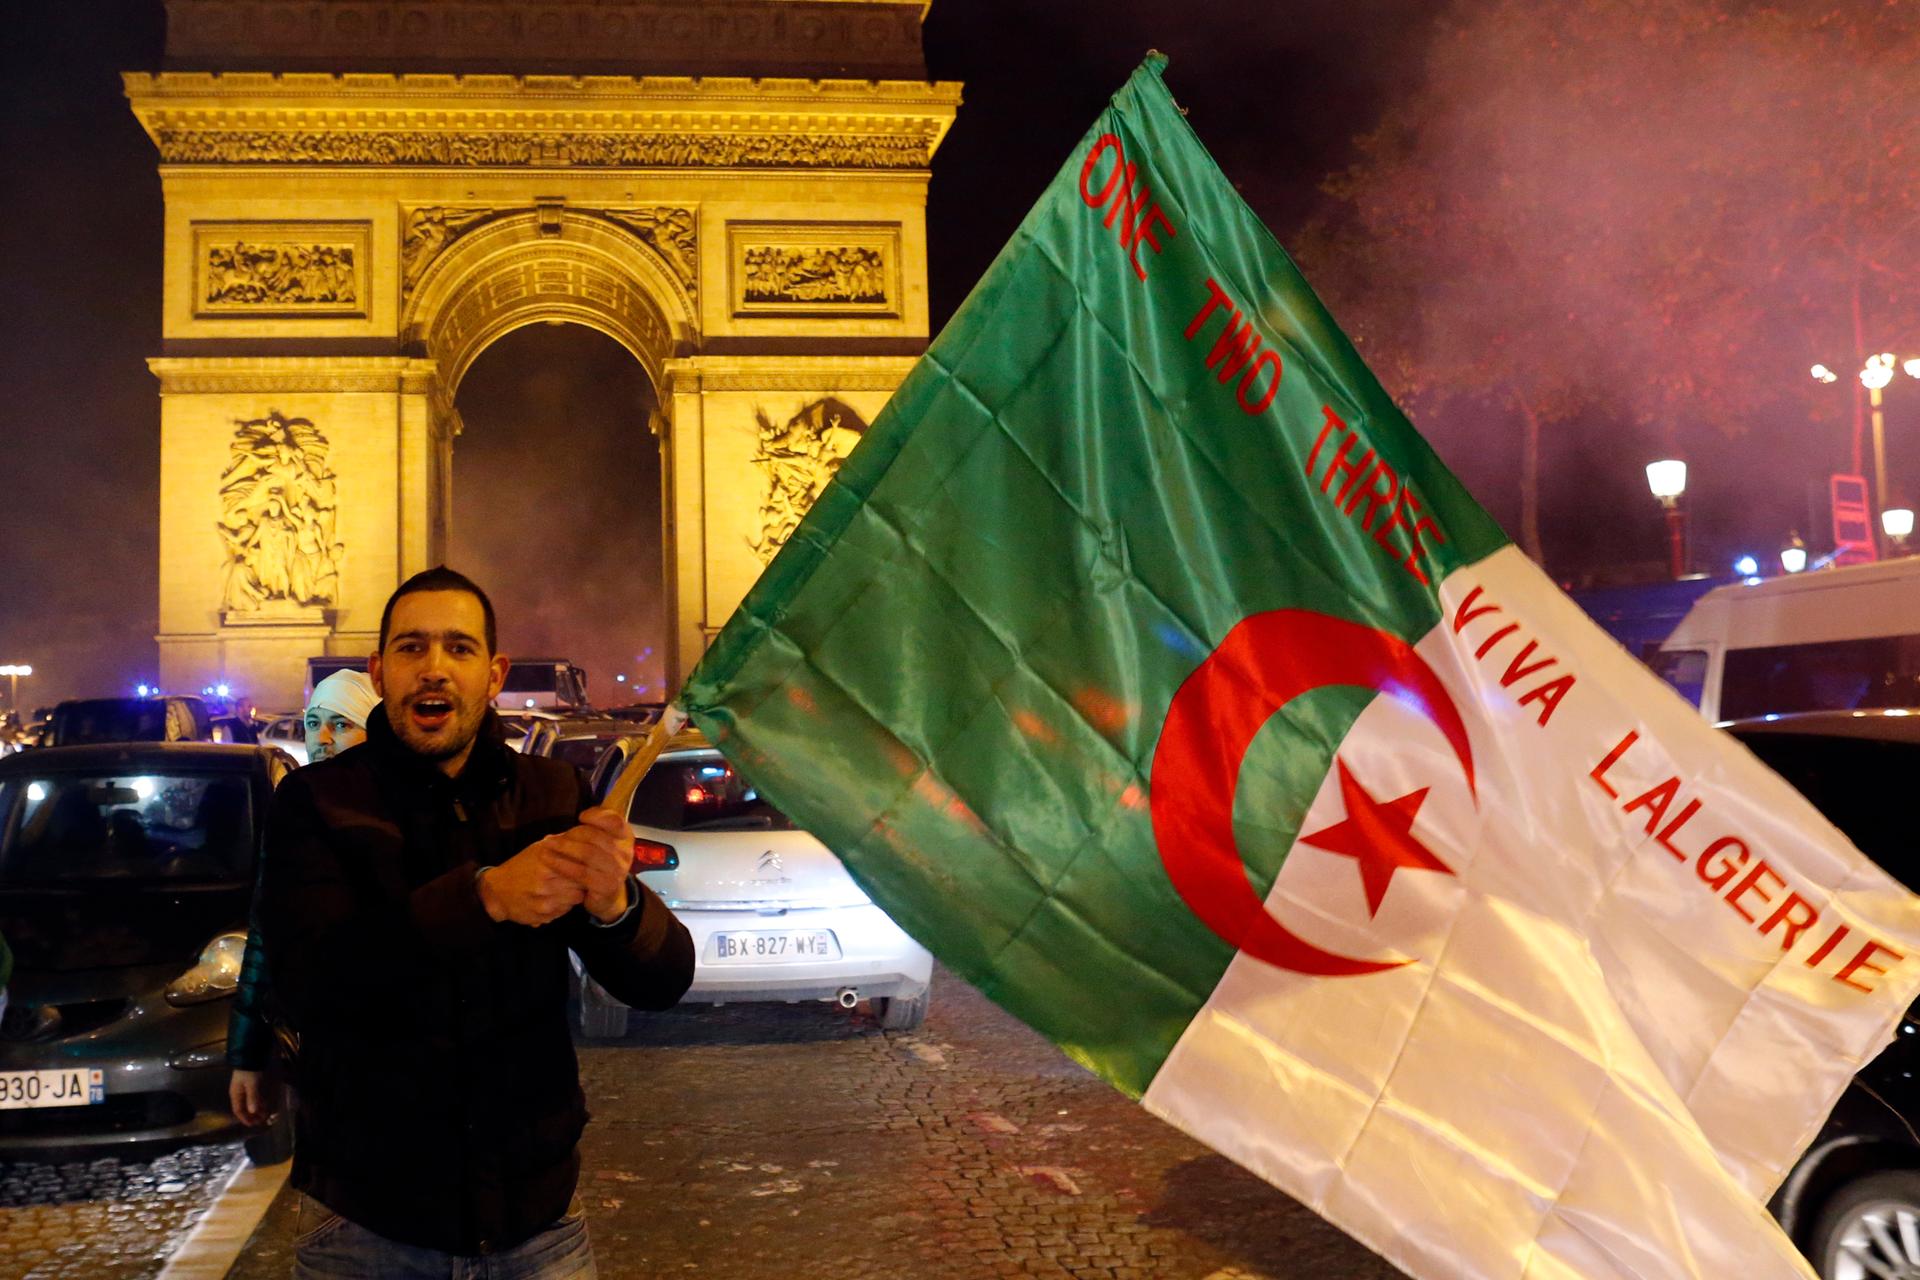 An Algerian soccer fan waves the Algerian flag in front of the Arc de Triomphe in Paris. With 16 French-born players on the Algerian team, Franco-Algerians have celebrated the Algerian victories with huge celebrations in French cities.